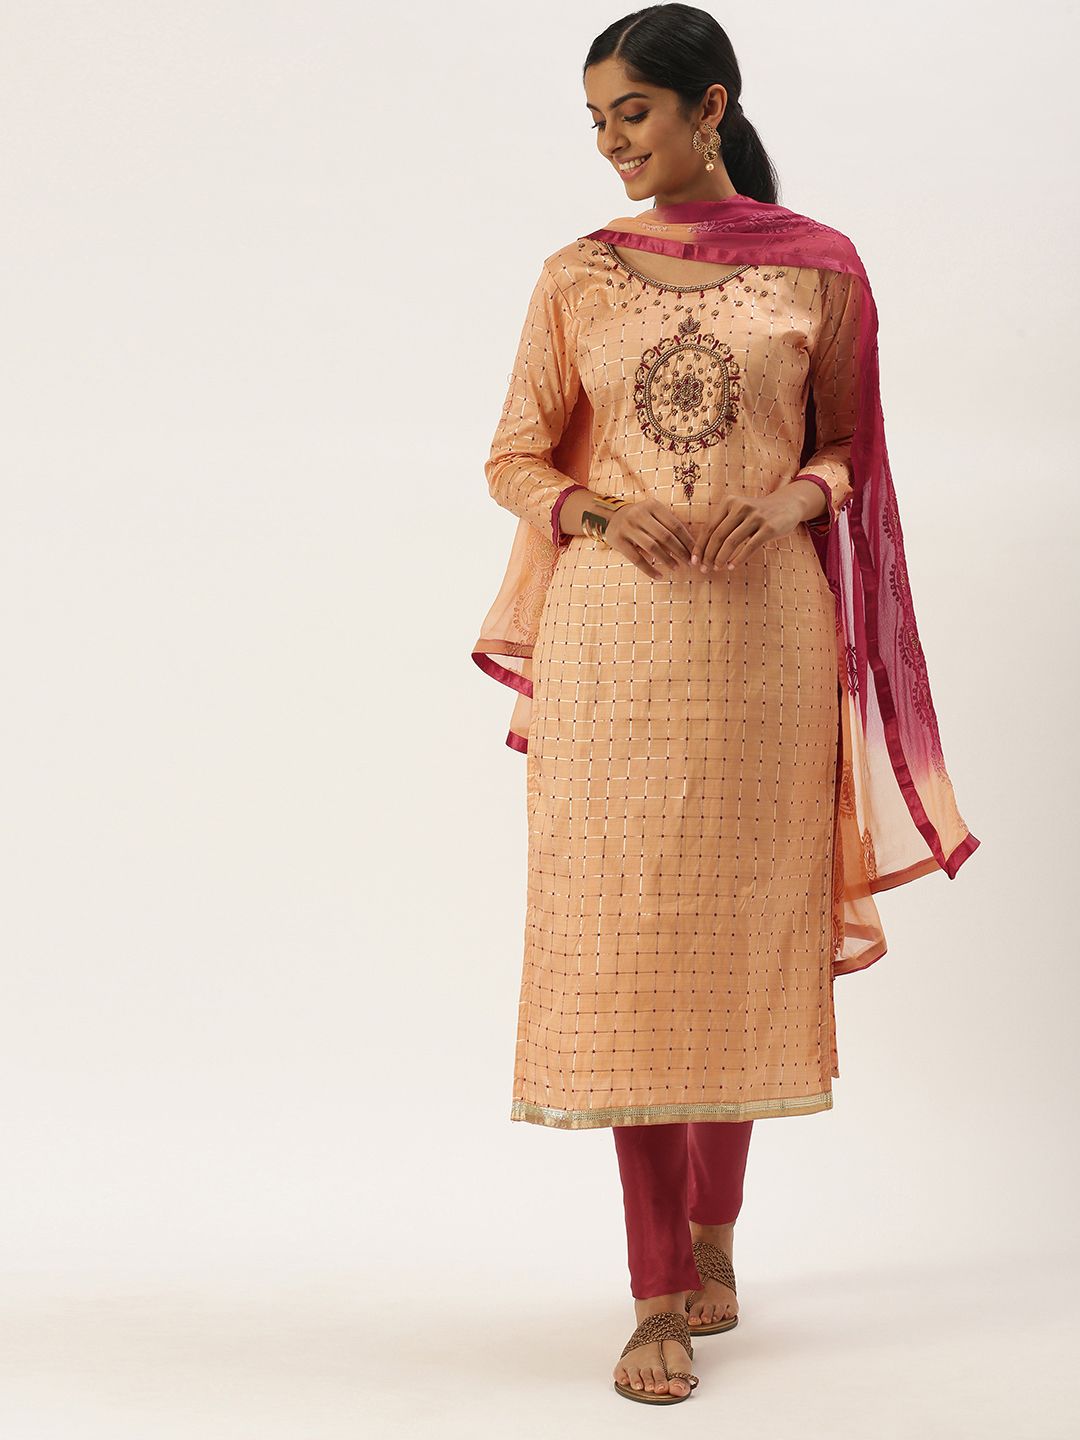 LADUSAA Peach-Coloured & Maroon Unstitched Dress Material Price in India